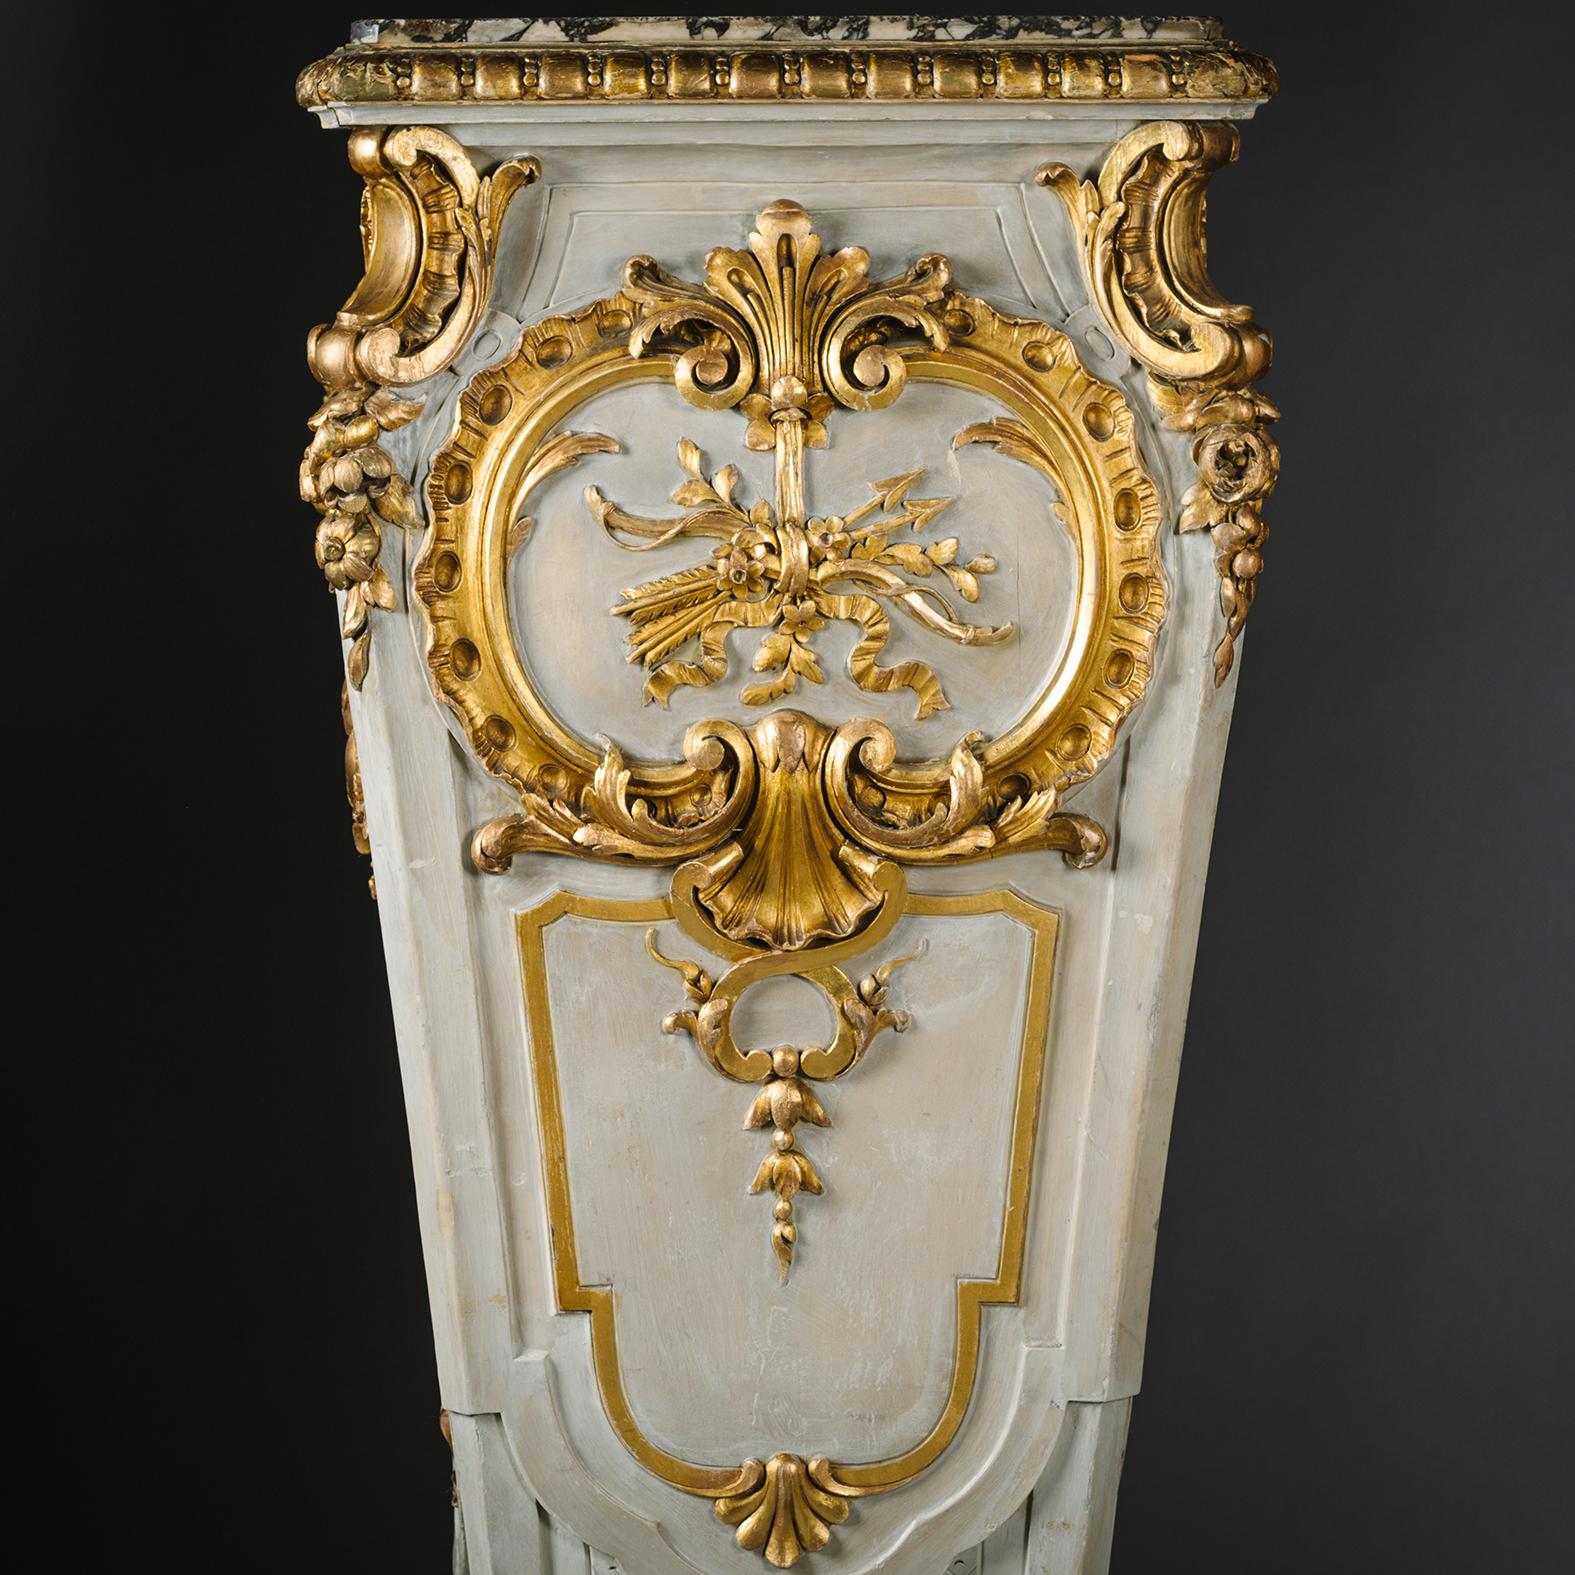 A Large Pair of Parcel-Gilt and Grey Painted Pedestals.

Each pedestal is of square tapering section inset with an Escalette Alpha rose marble top and carved overall with scrollwork, centred by an acanthus cartouche with ribbon tied trophy, above